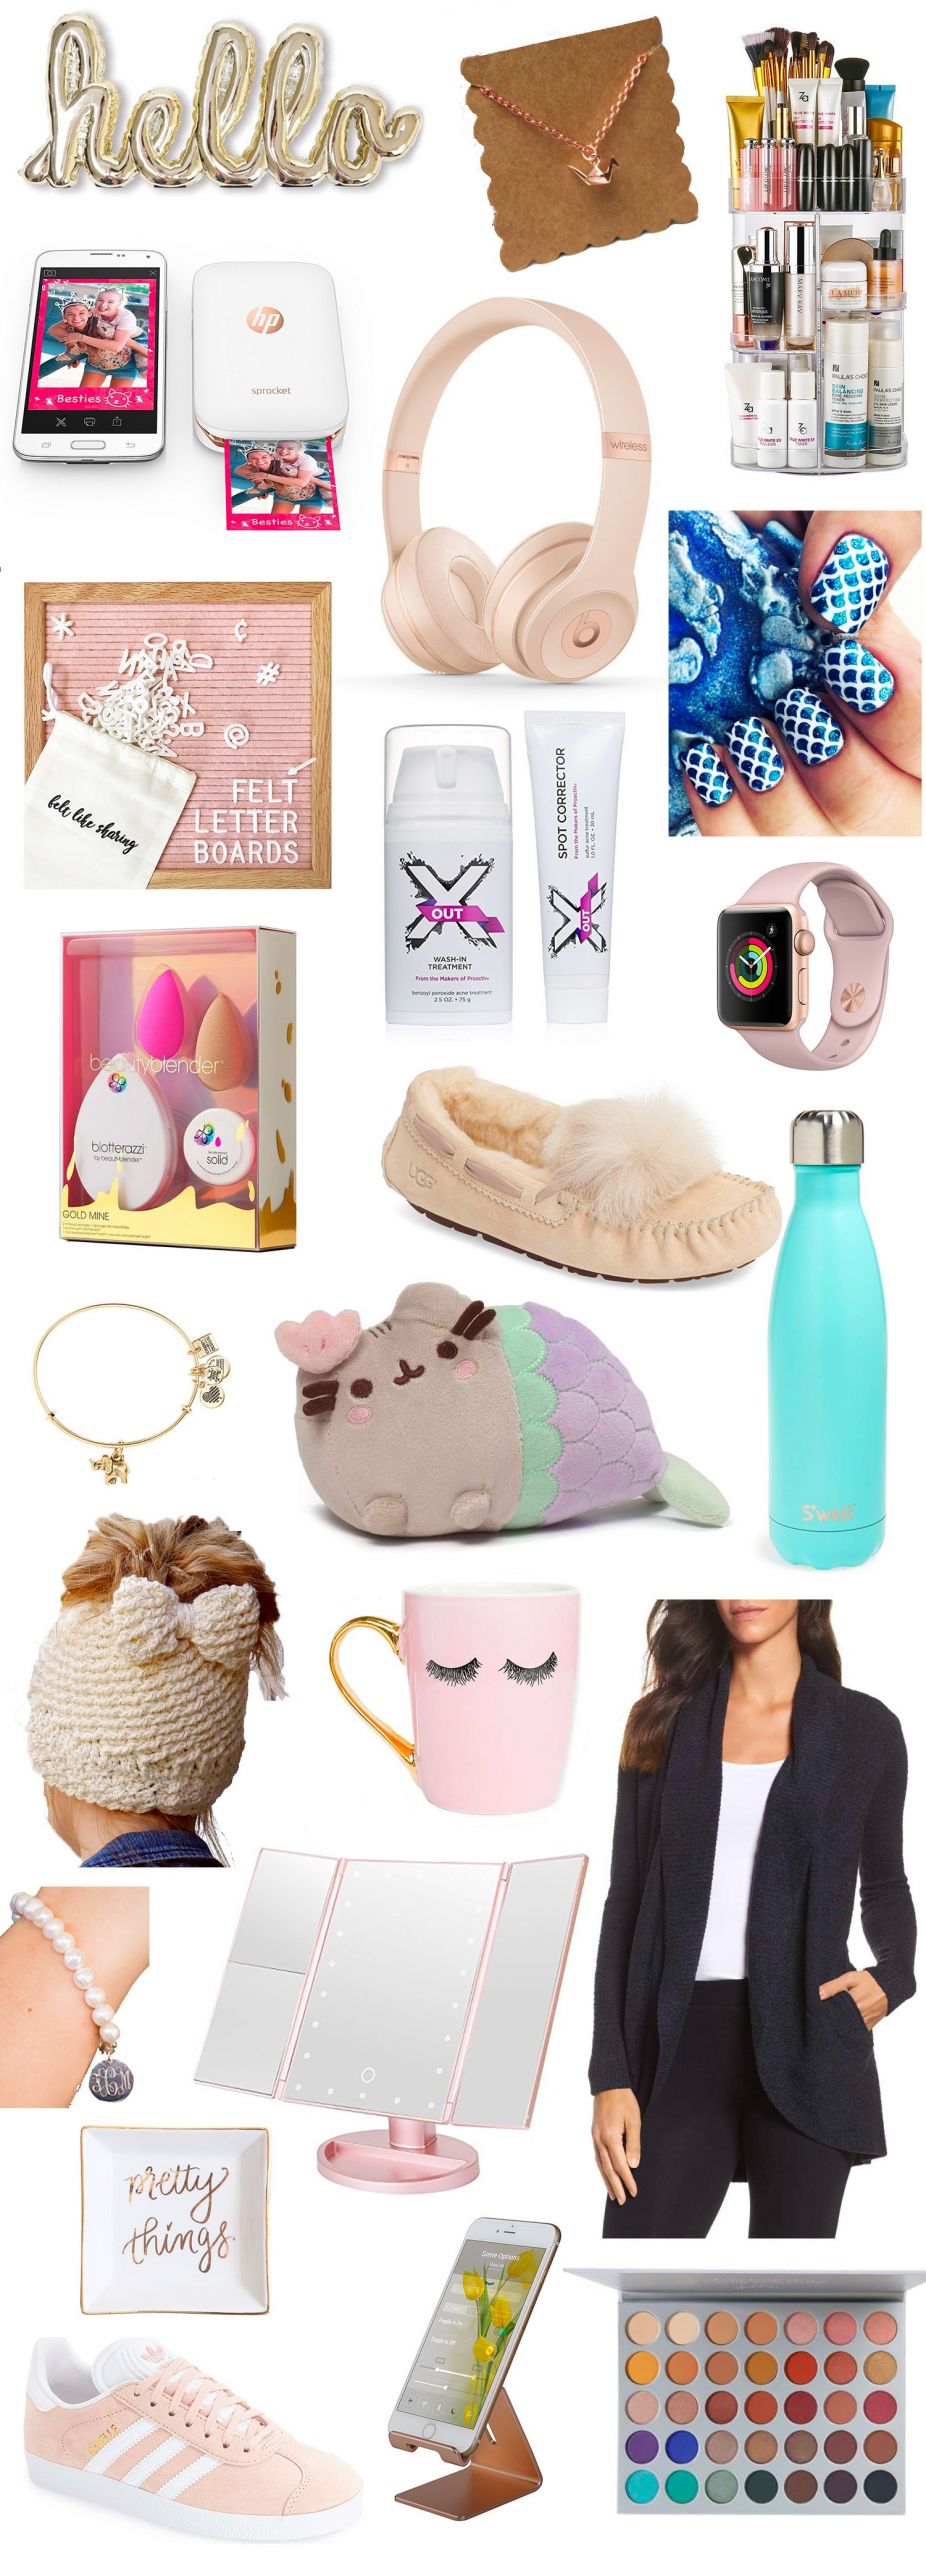 Gift Ideas For Teenage Girls
 Top Gifts for Teens This Christmas